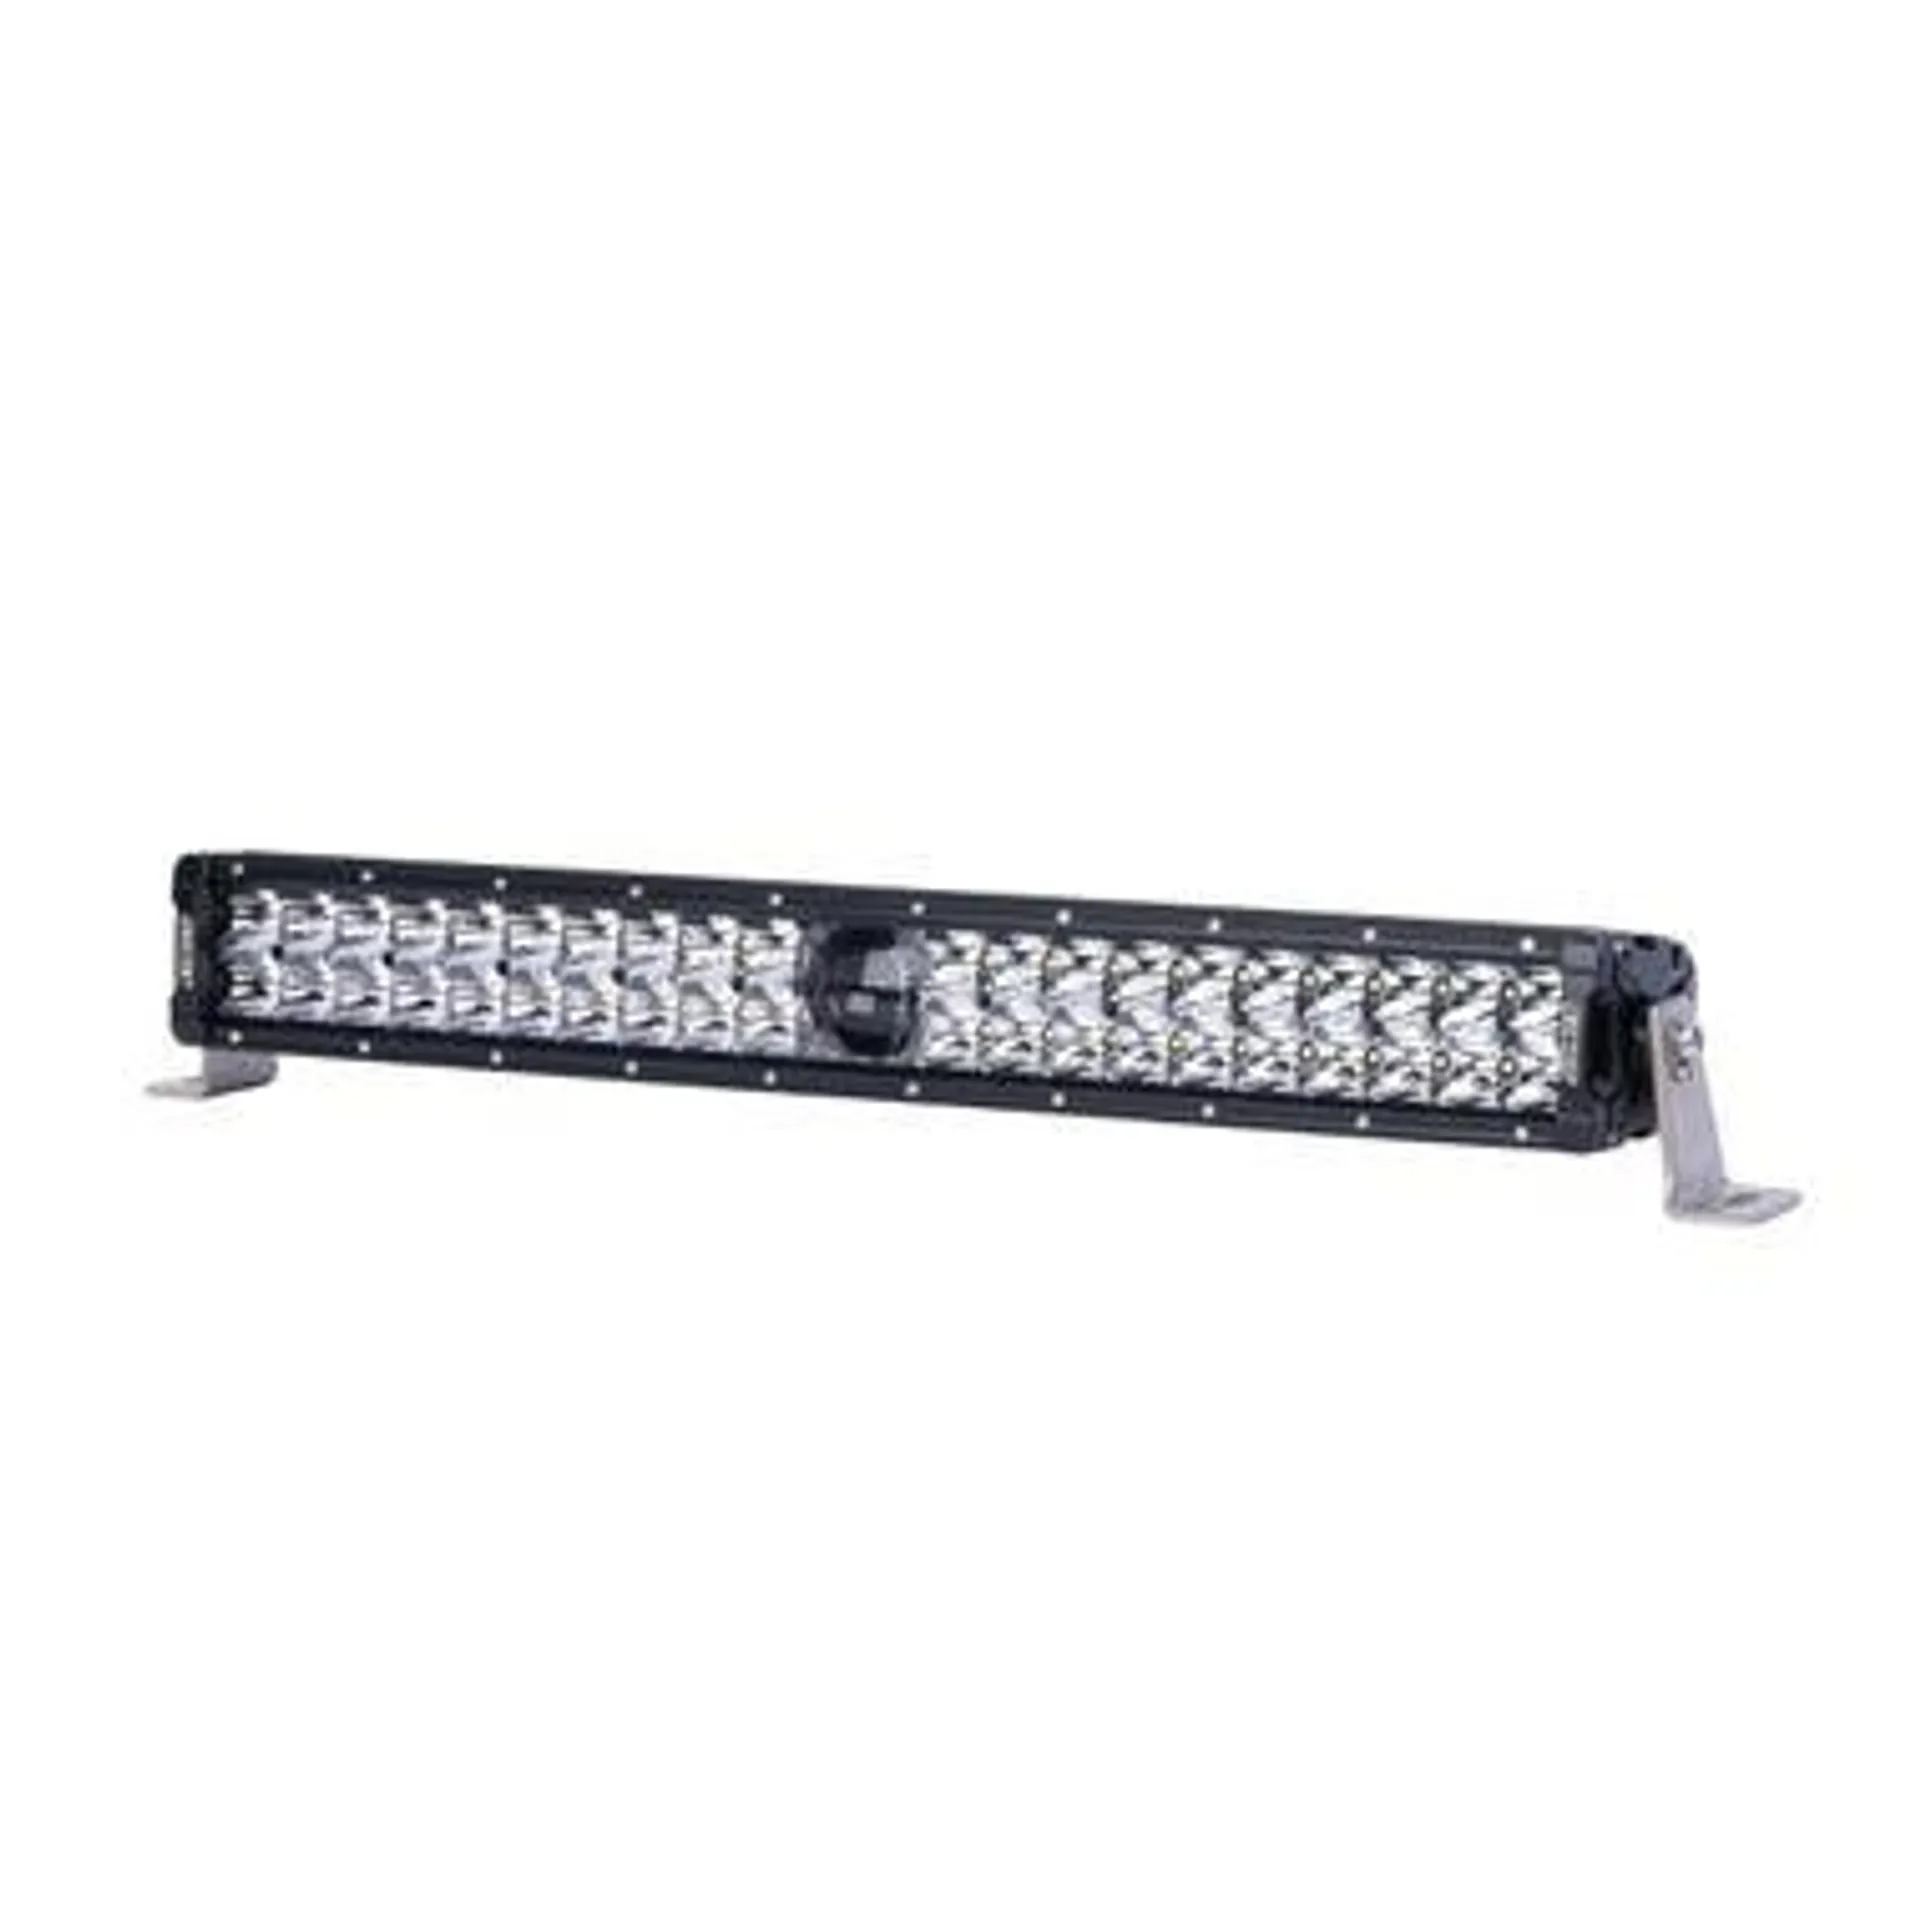 Kings 20" Laser Light Bar | 1 Lux @ 914m | 7,061 lumens | IP68 Rated